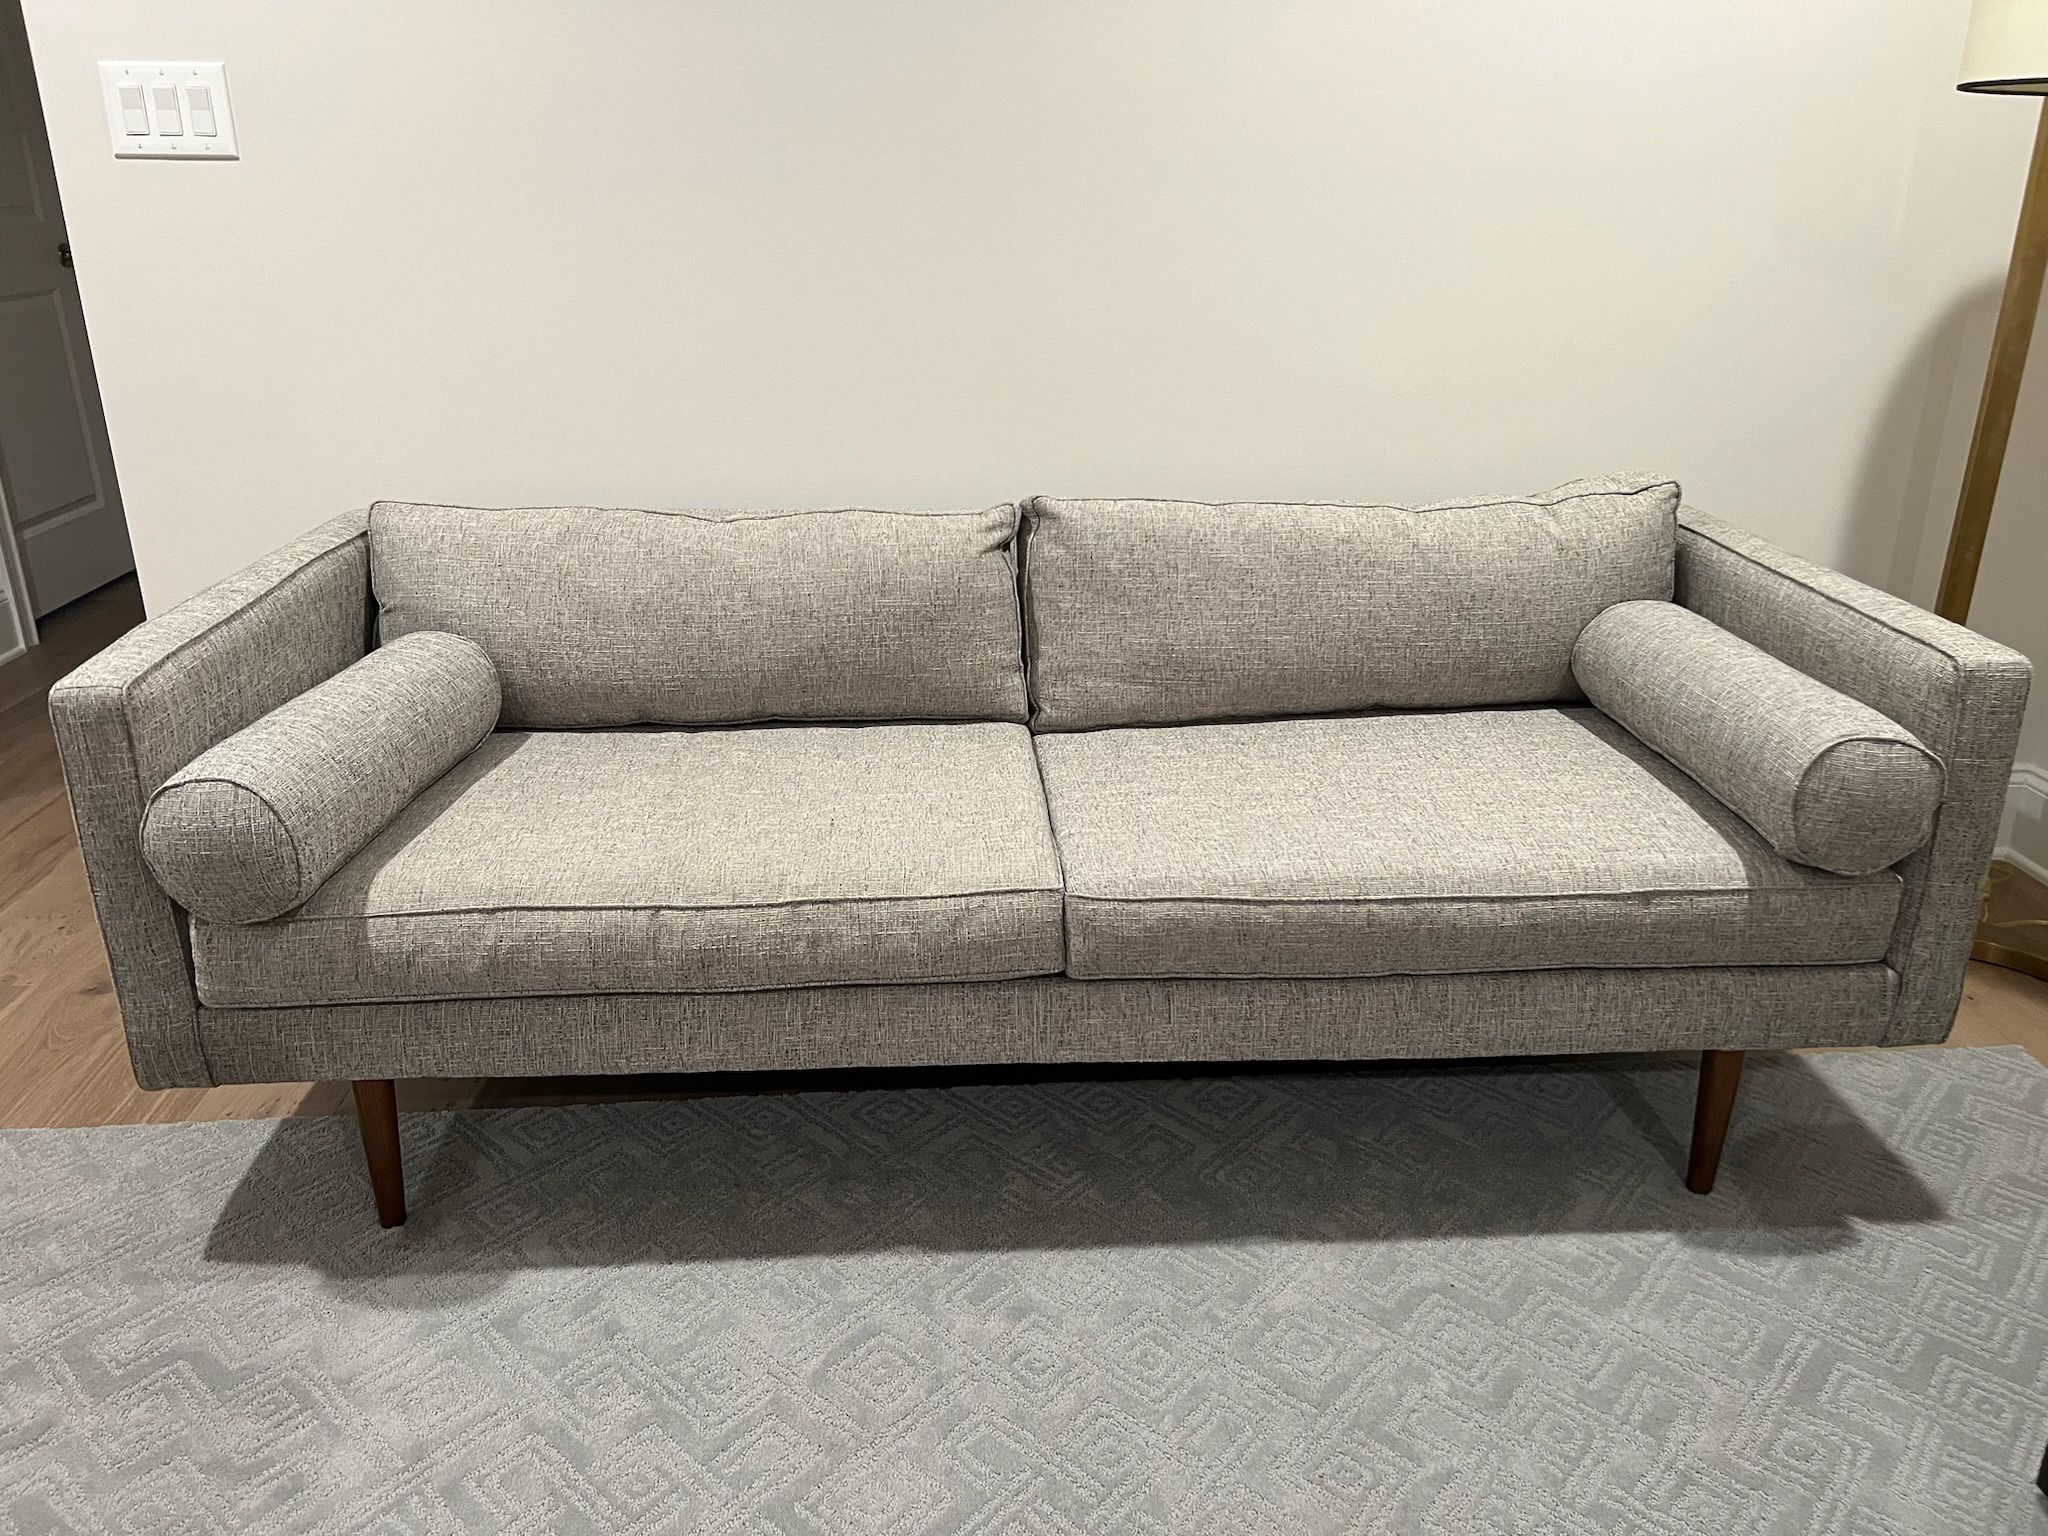 West Elm Sofa with 2 Pillows in Excellent Condition 34d x 28h x 80w x 23sdx18sh Smoke free household